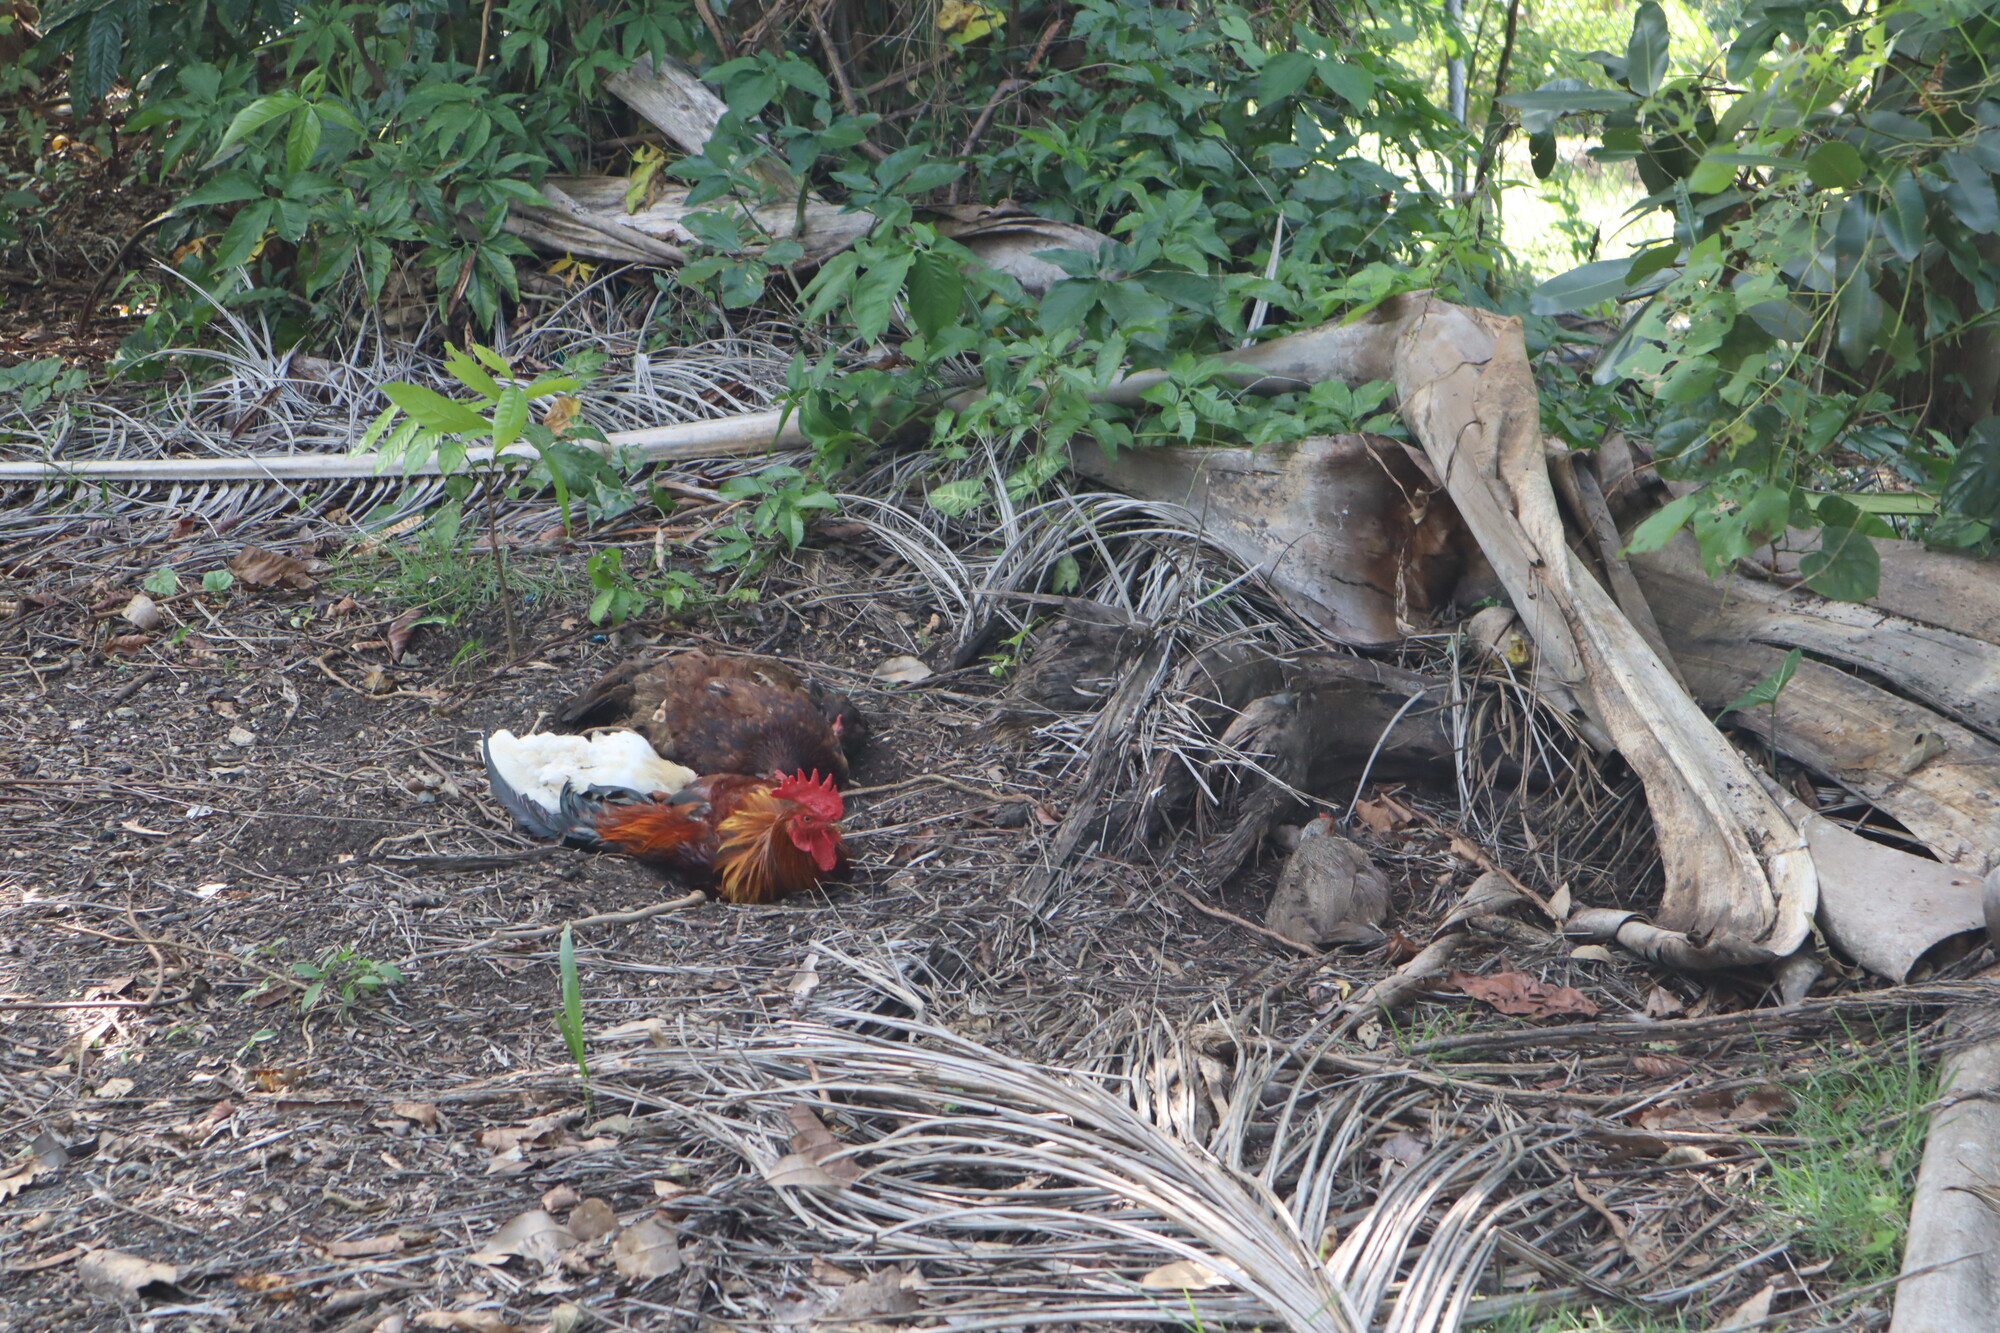 Chickens in a lush green forest